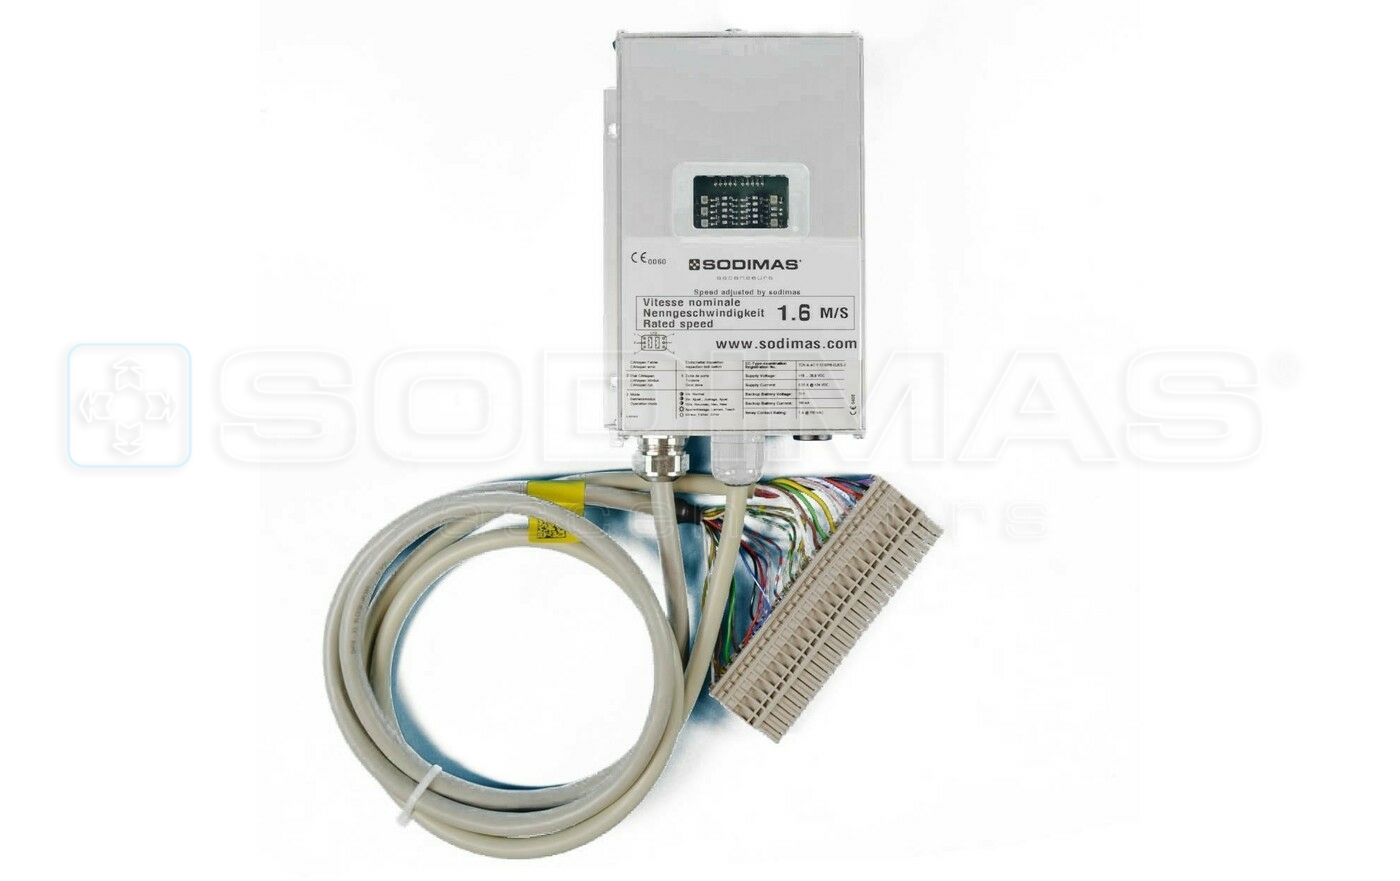 Boîtier Solimax 1,6 m/s QItouch